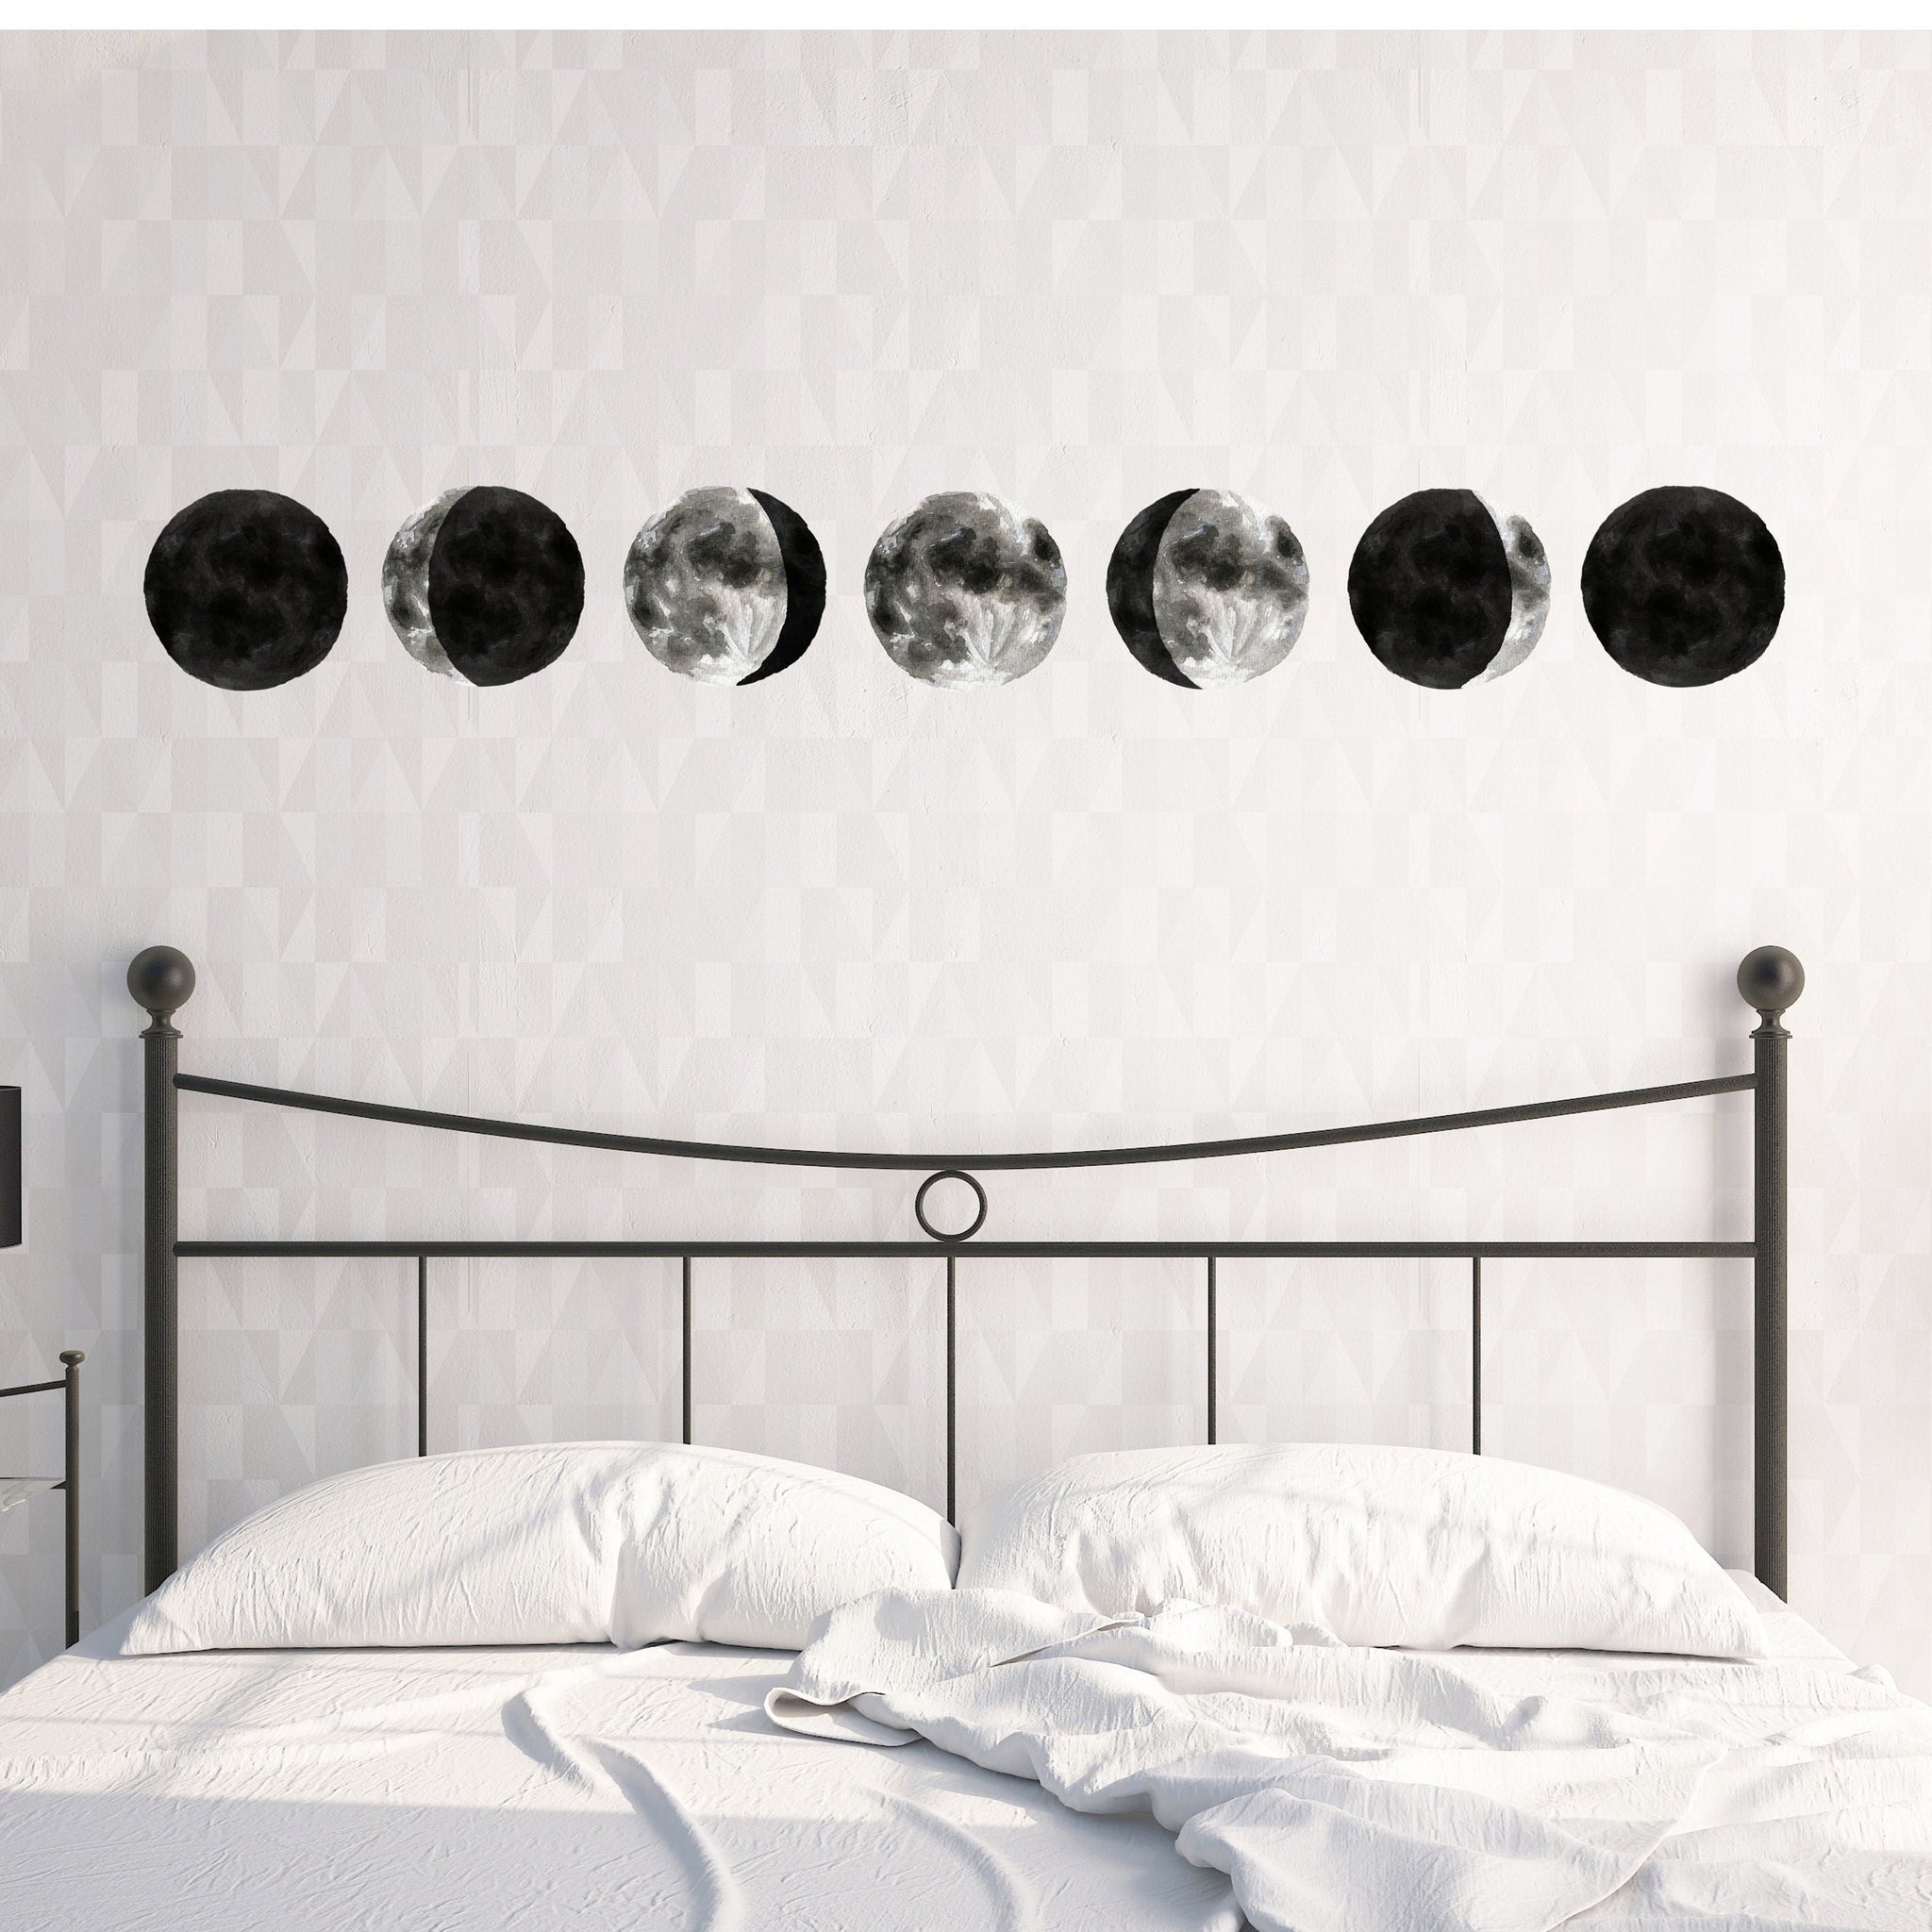 Moon Phase Wall Decals, Wall Stickers, Removable Decal, Moon Phase Decor, Bedroom Wall Decor, Living Room Decor, Wall Decorations, Moon Wall